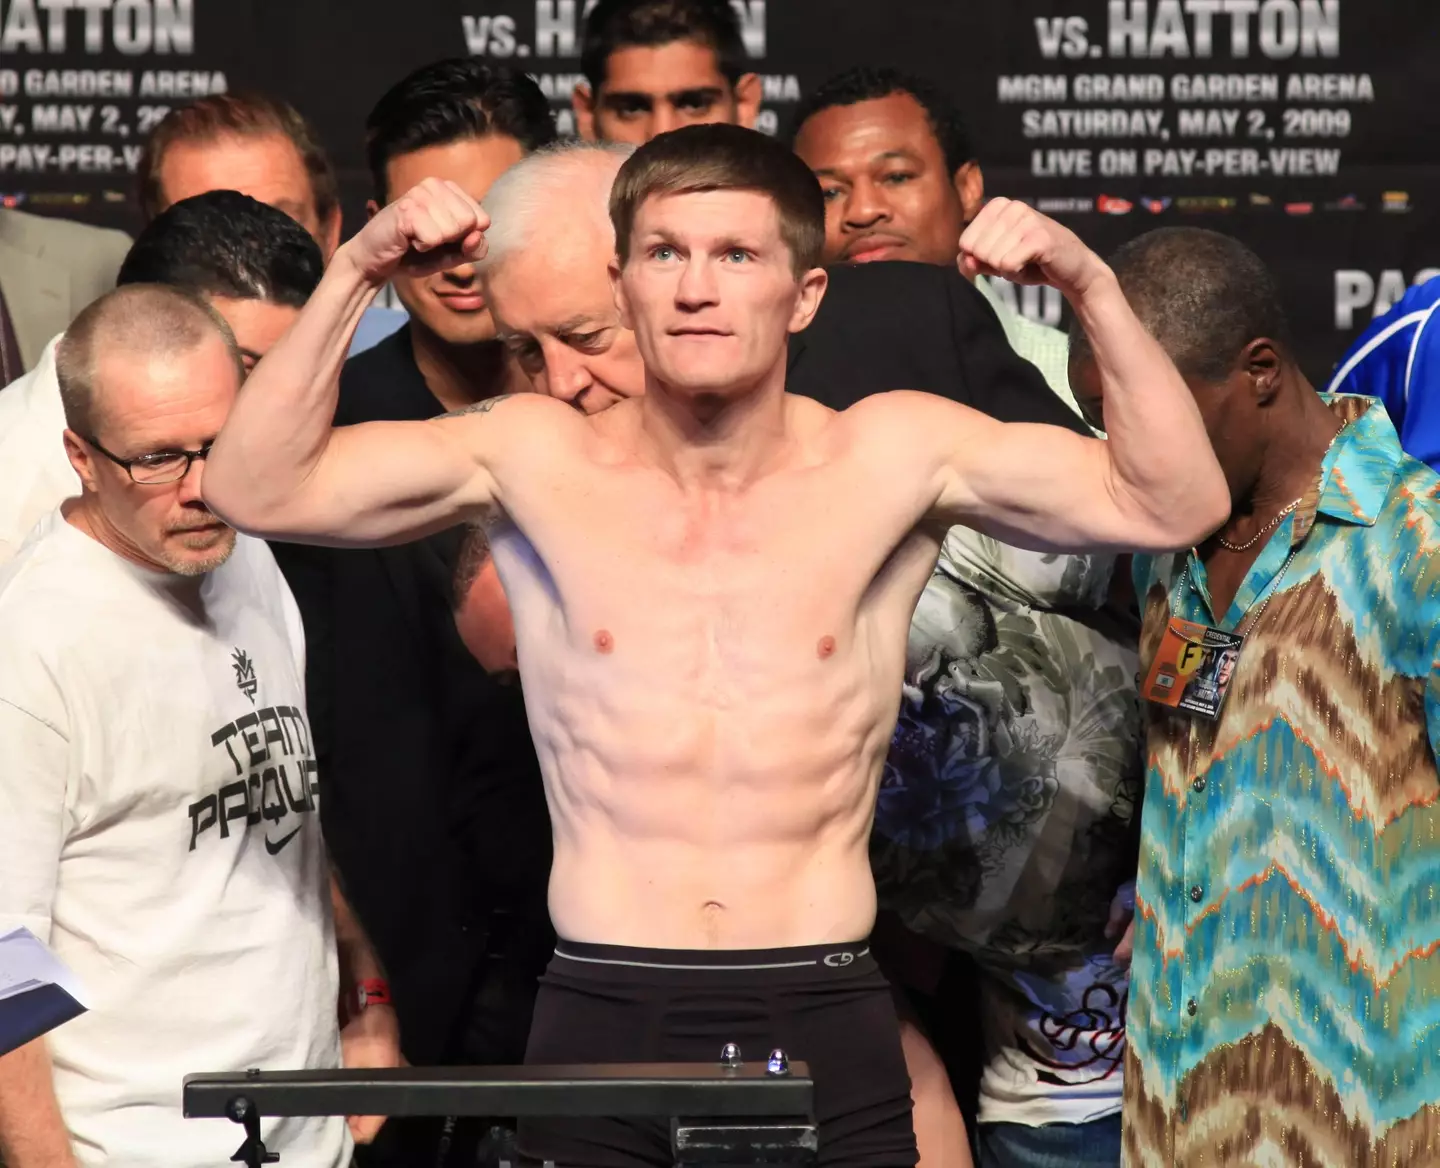 Hatton commanded a huge following during his fight career.